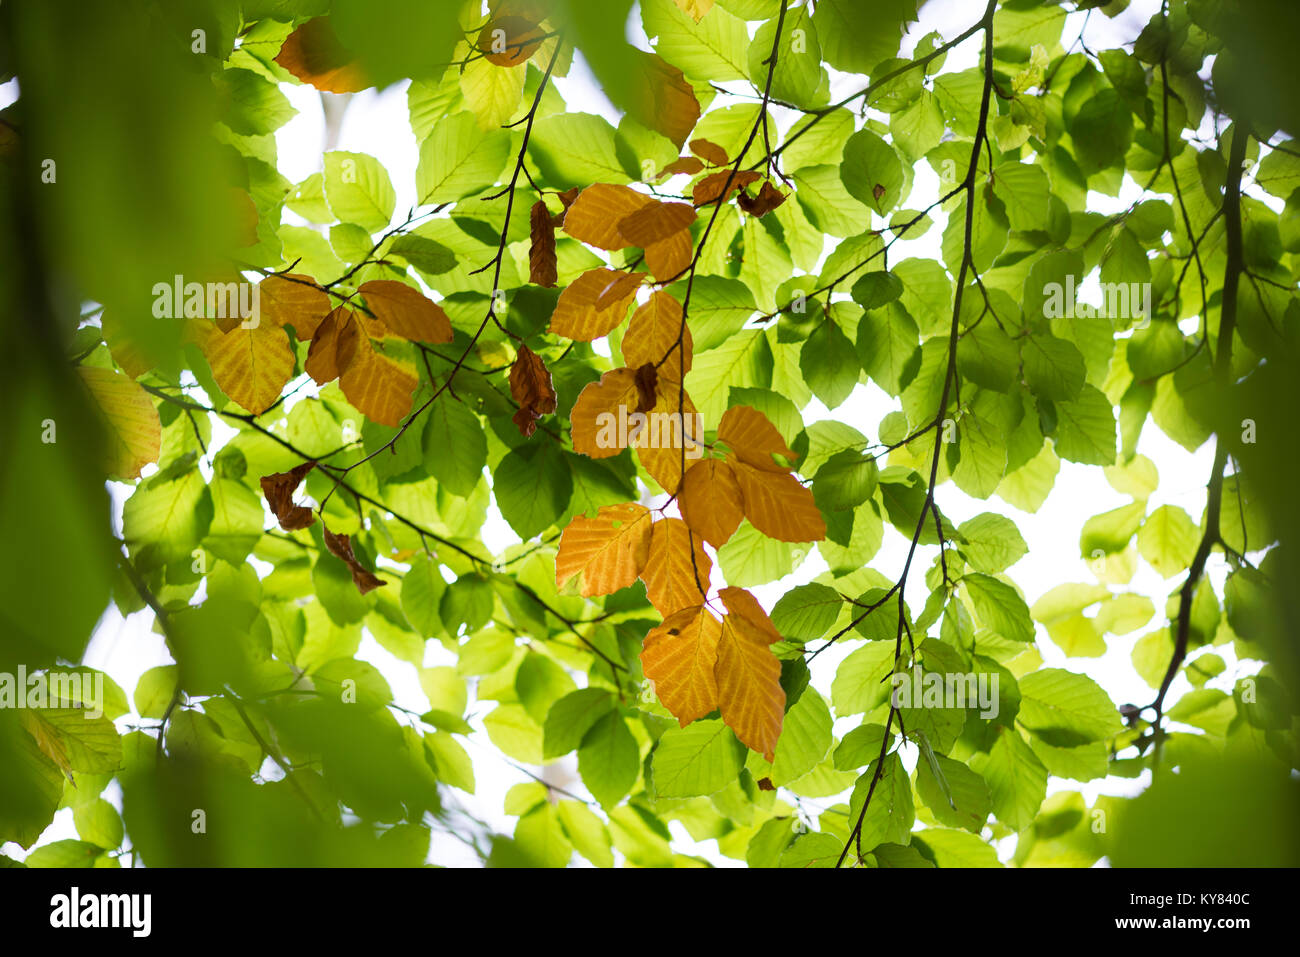 Beech tree leaves changing colour in autumn Stock Photo